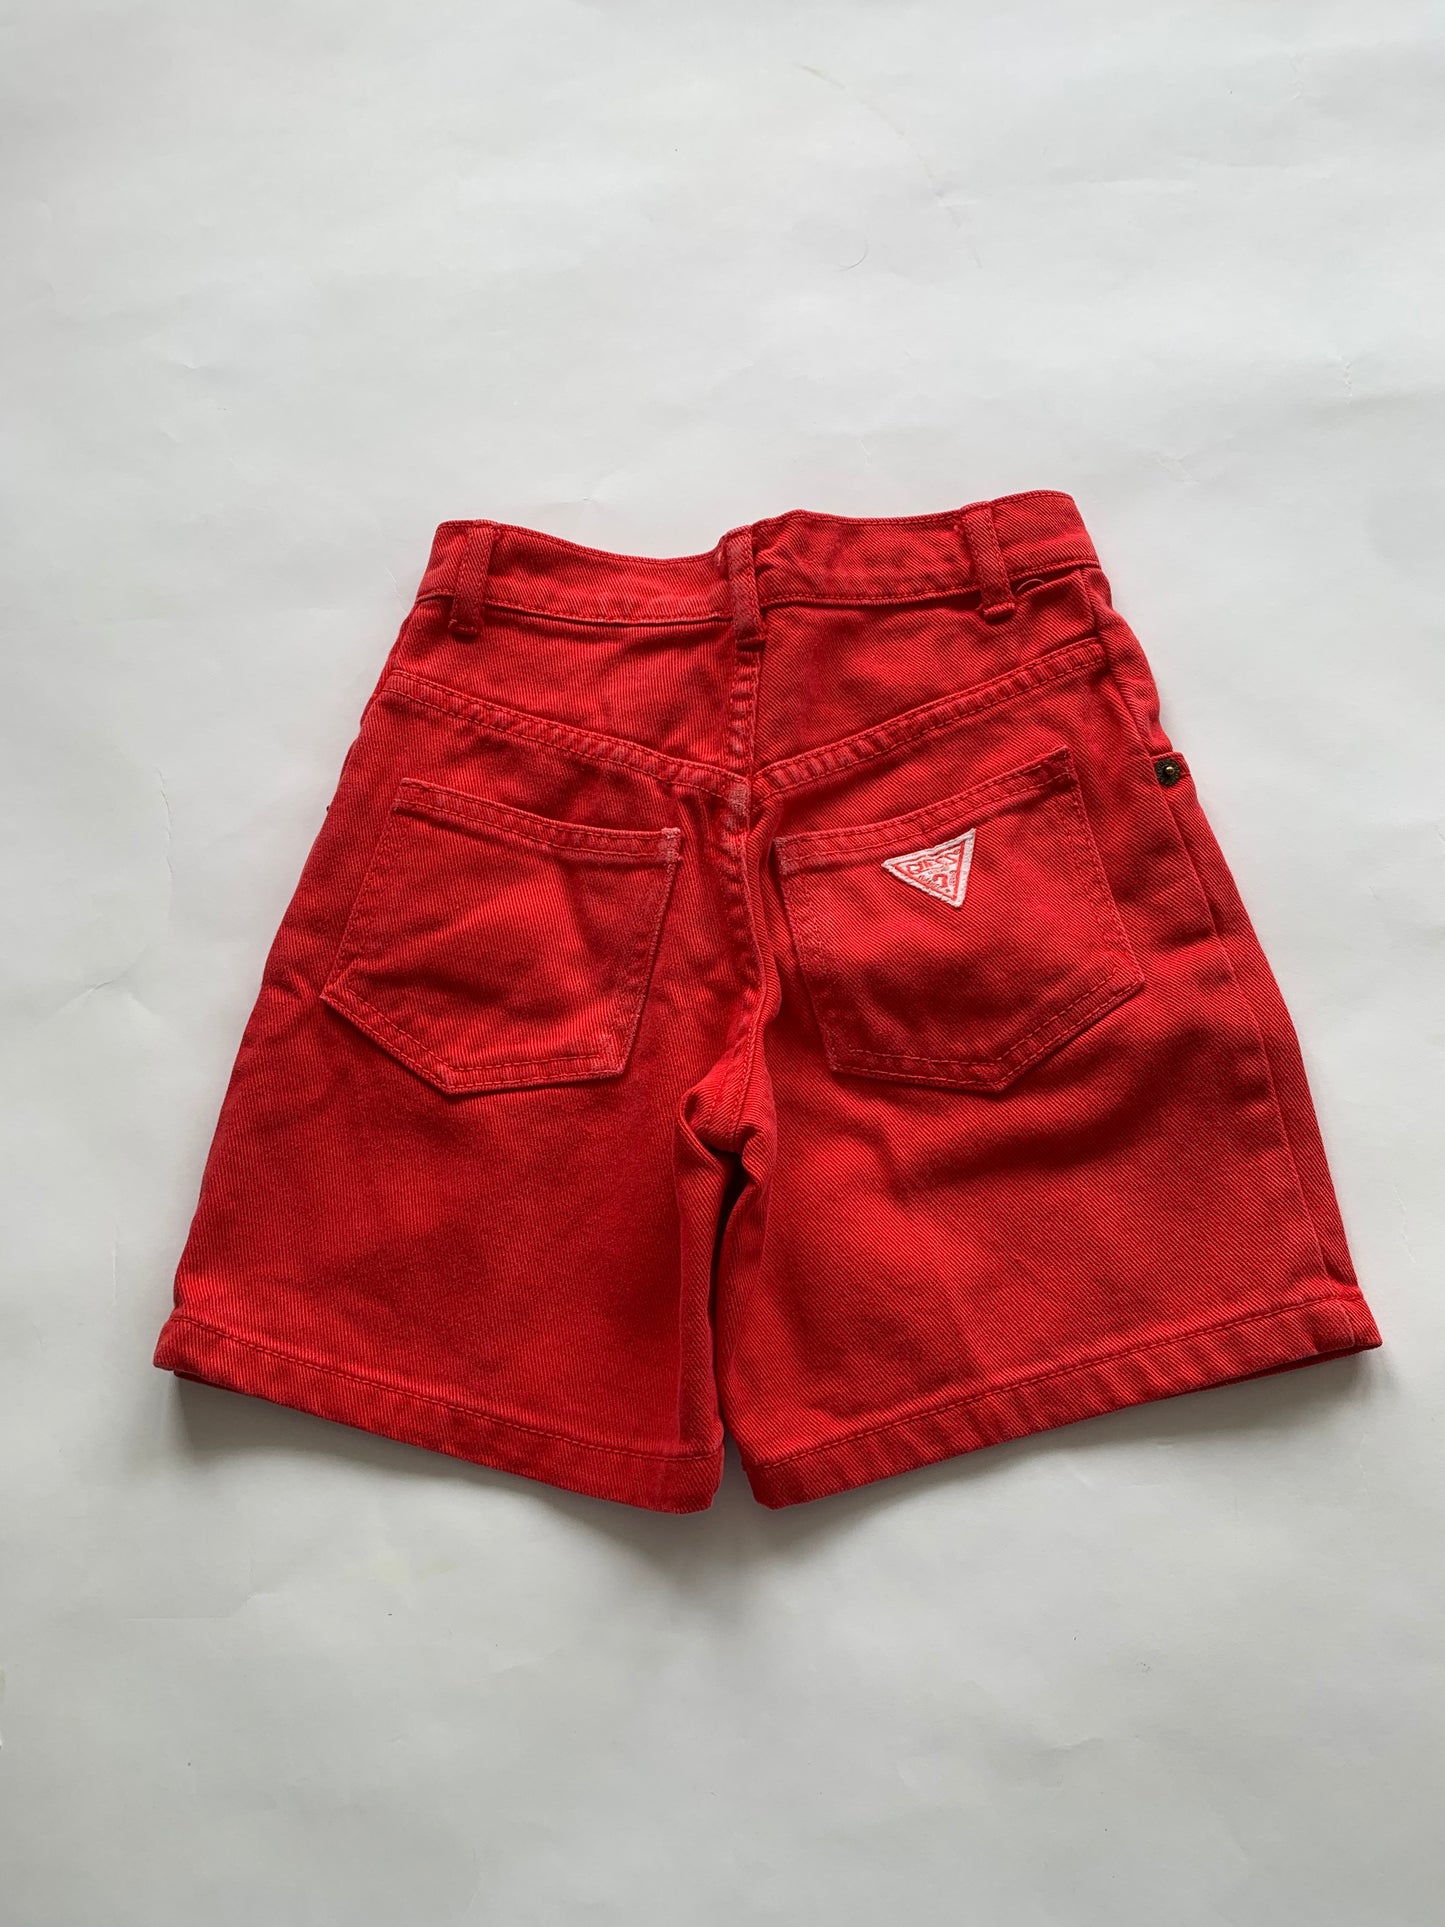 Guess Denim Shorts Made in USA /4-5Y